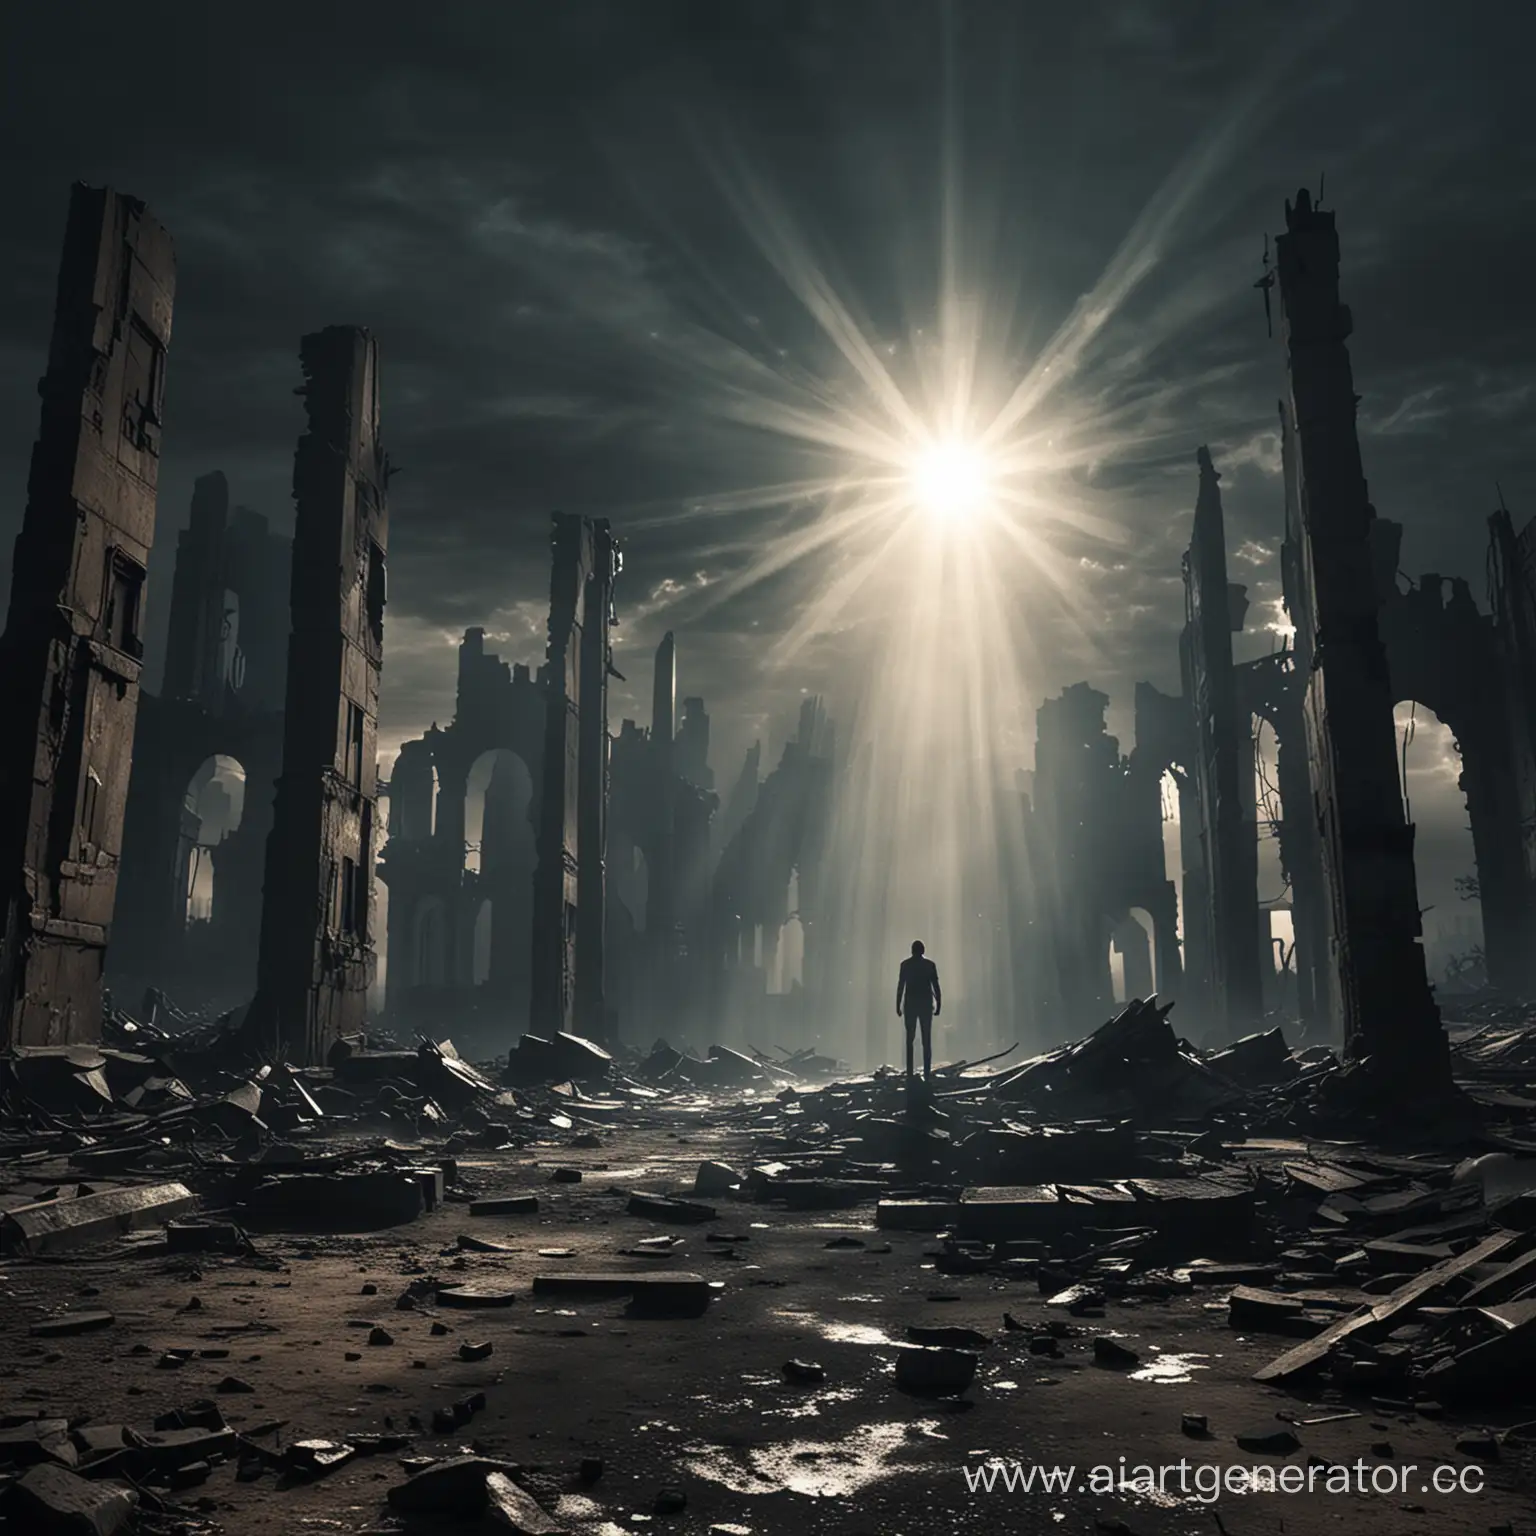 Solitary-Figure-Amidst-Ruins-in-the-Dark-with-Rays-of-Sunlight